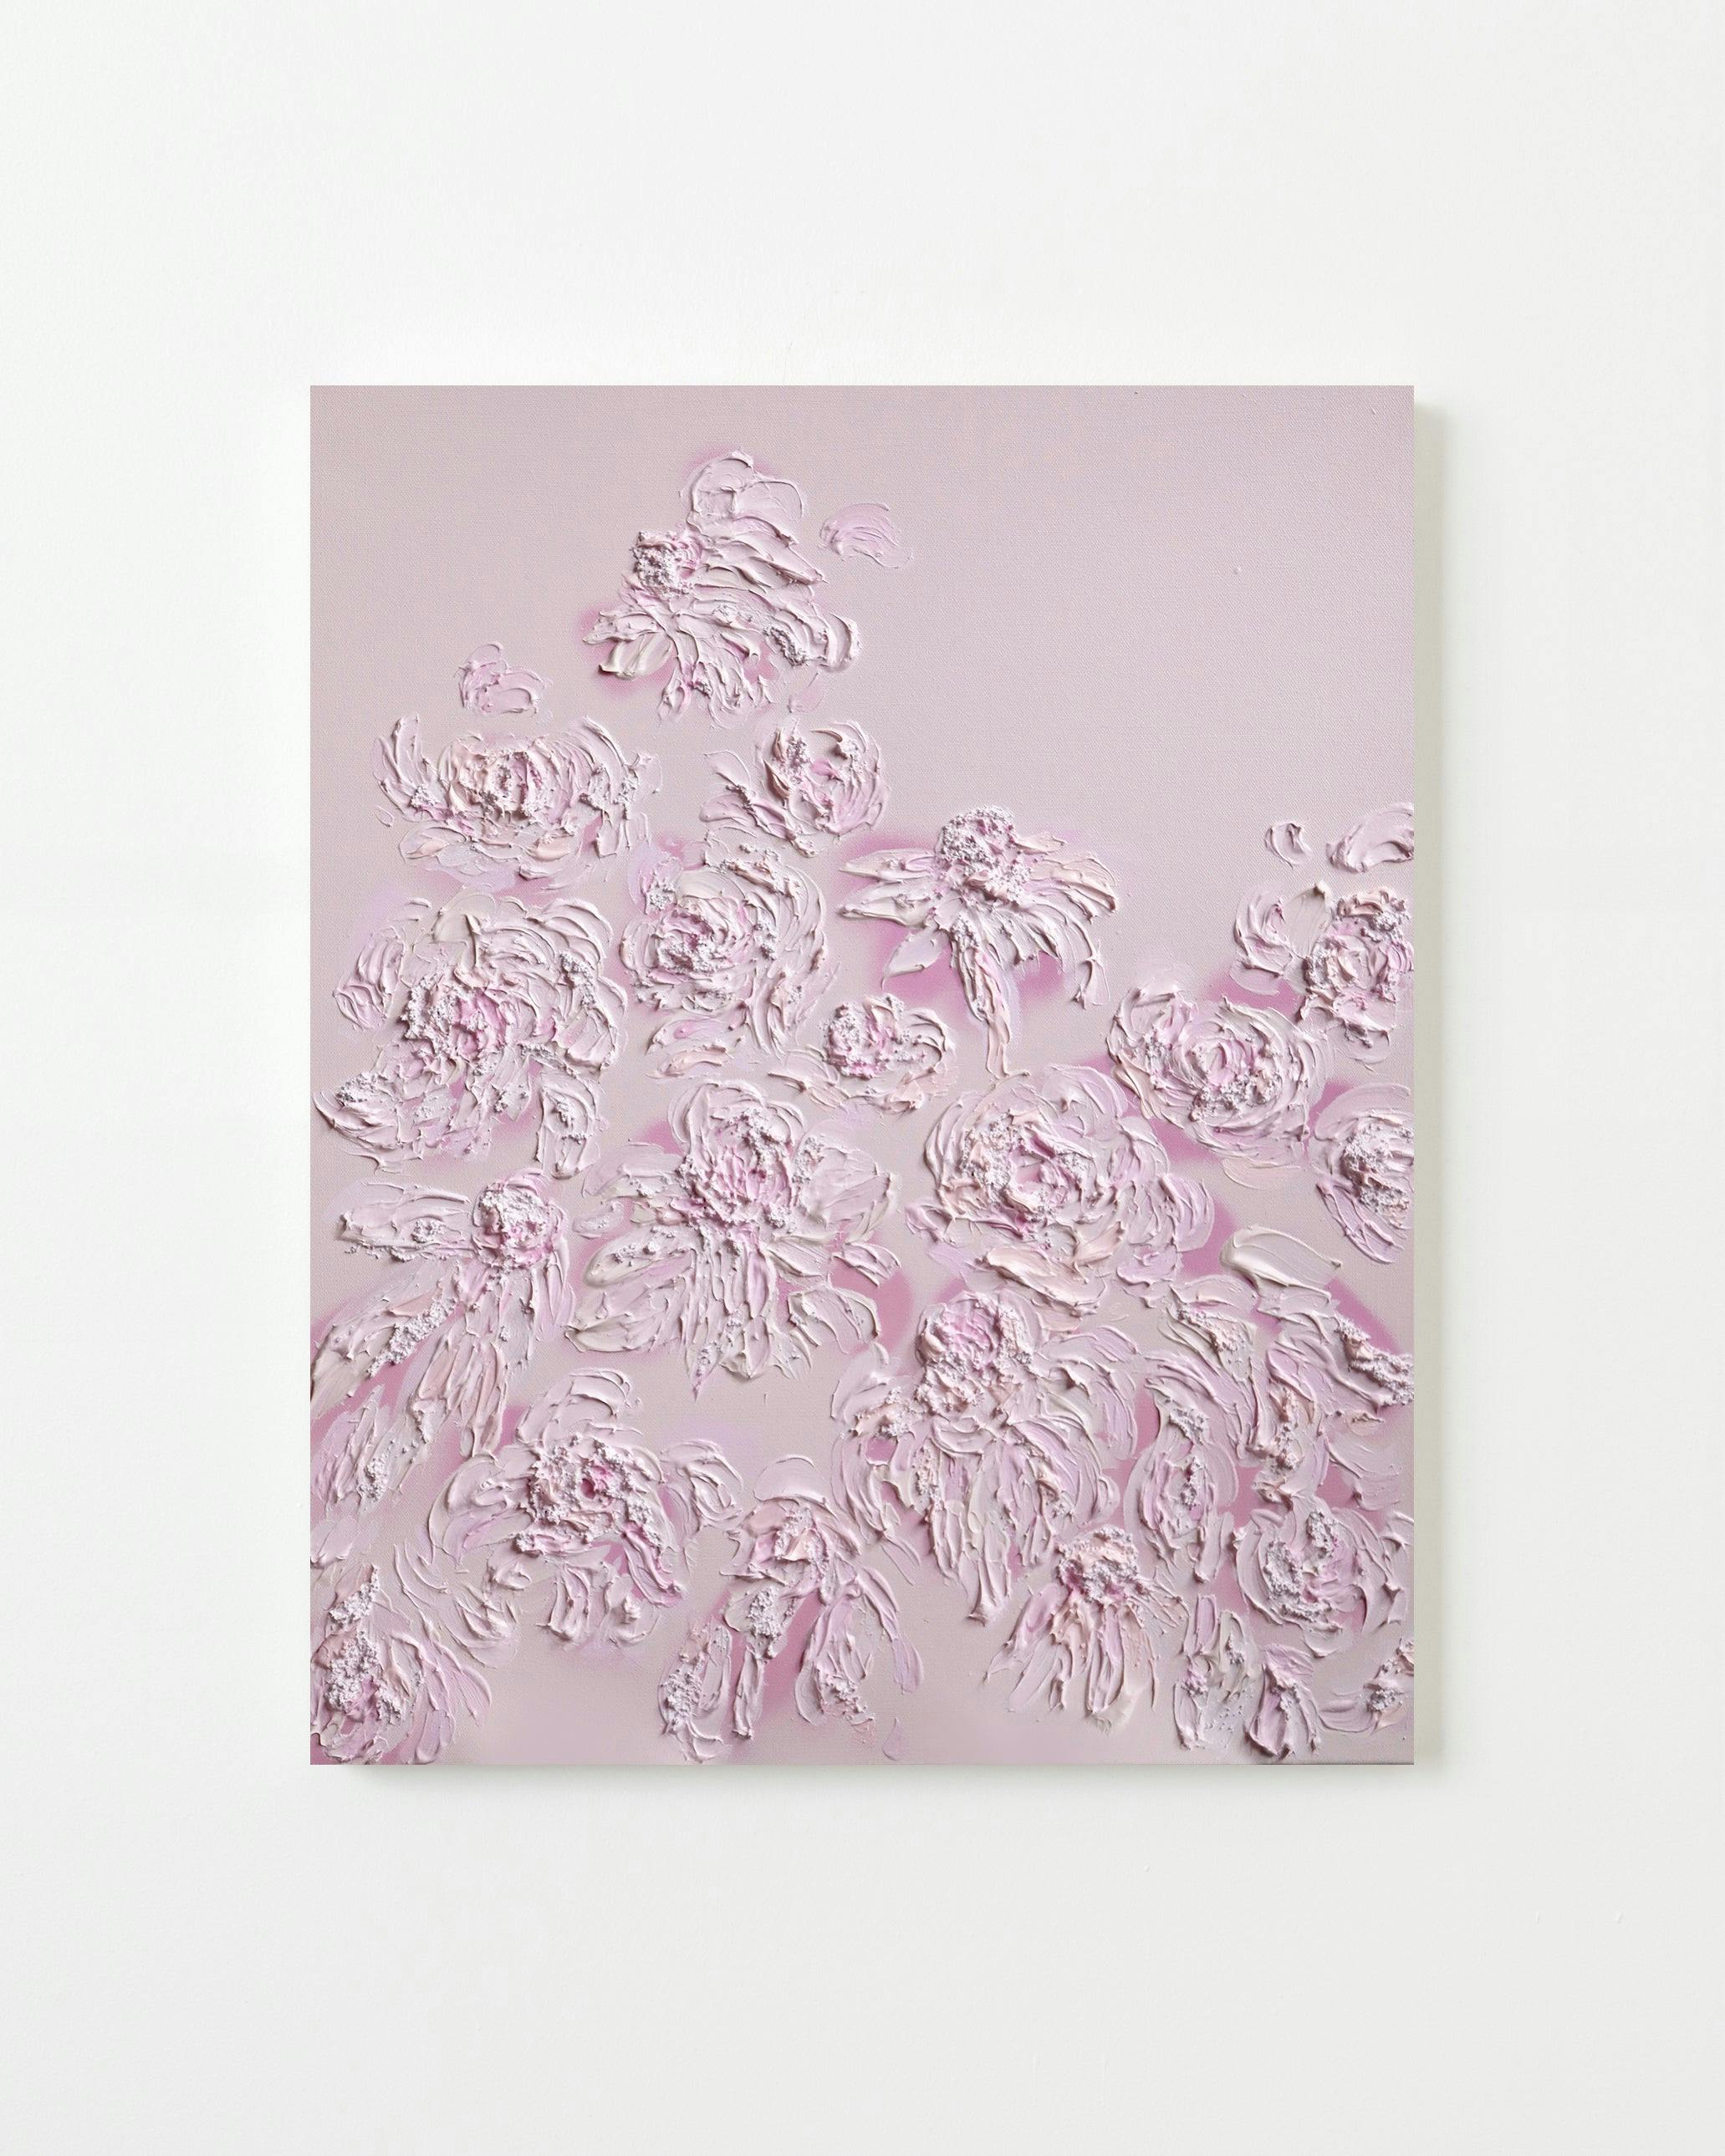 Painting by Erin Lynn Welsh titled "Monochromatic 5".